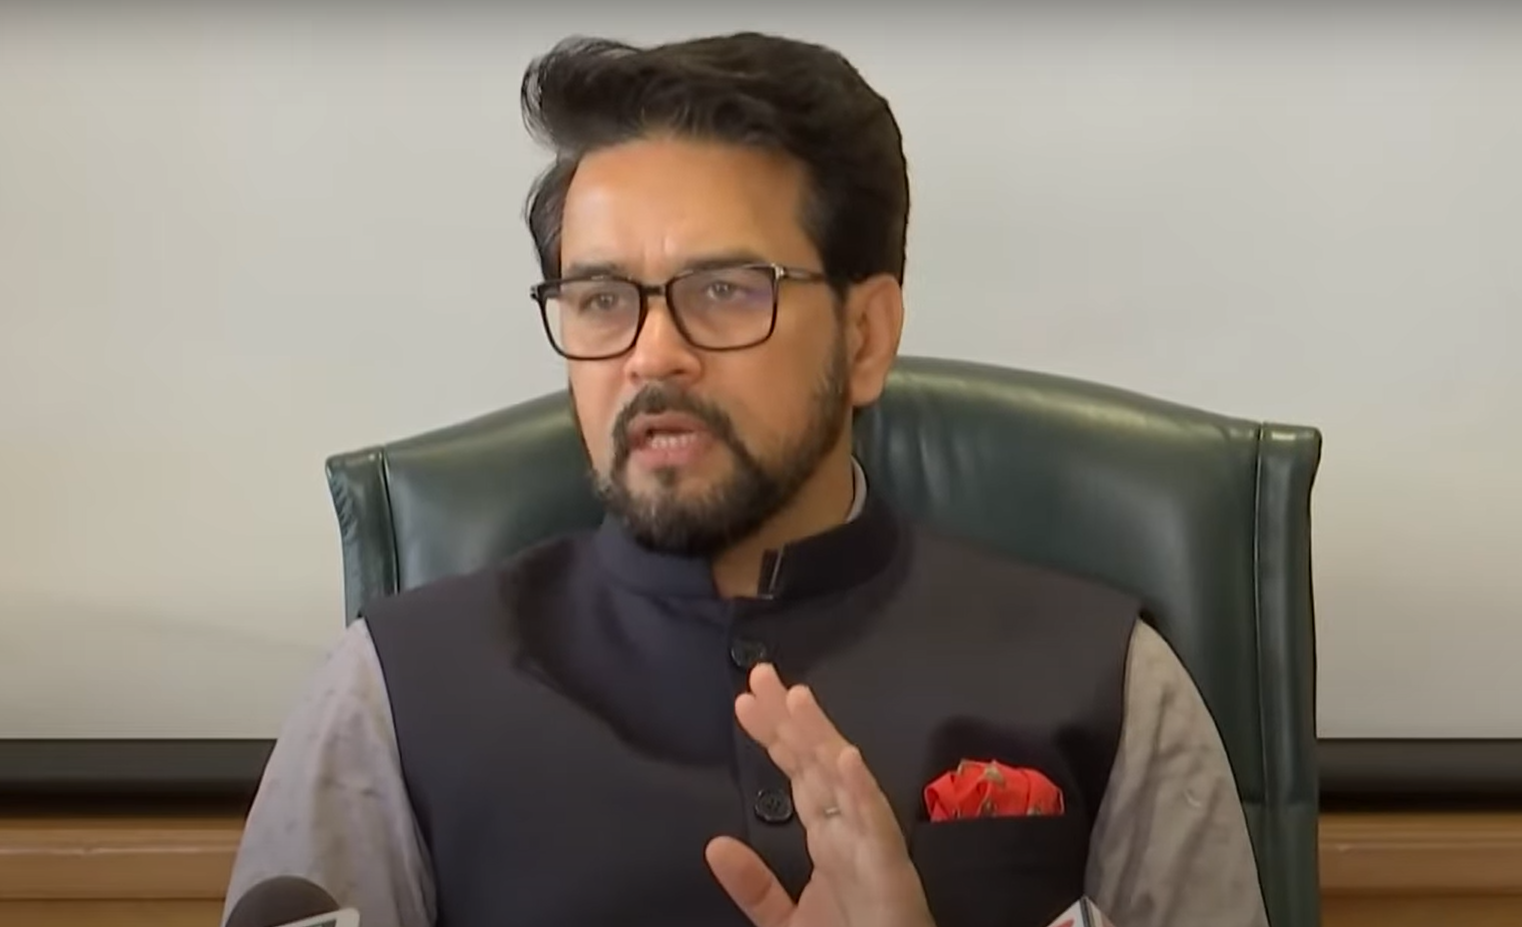 Information and Broadcasting Minister Anurag Singh Thakur condemns “boycott culture” of films